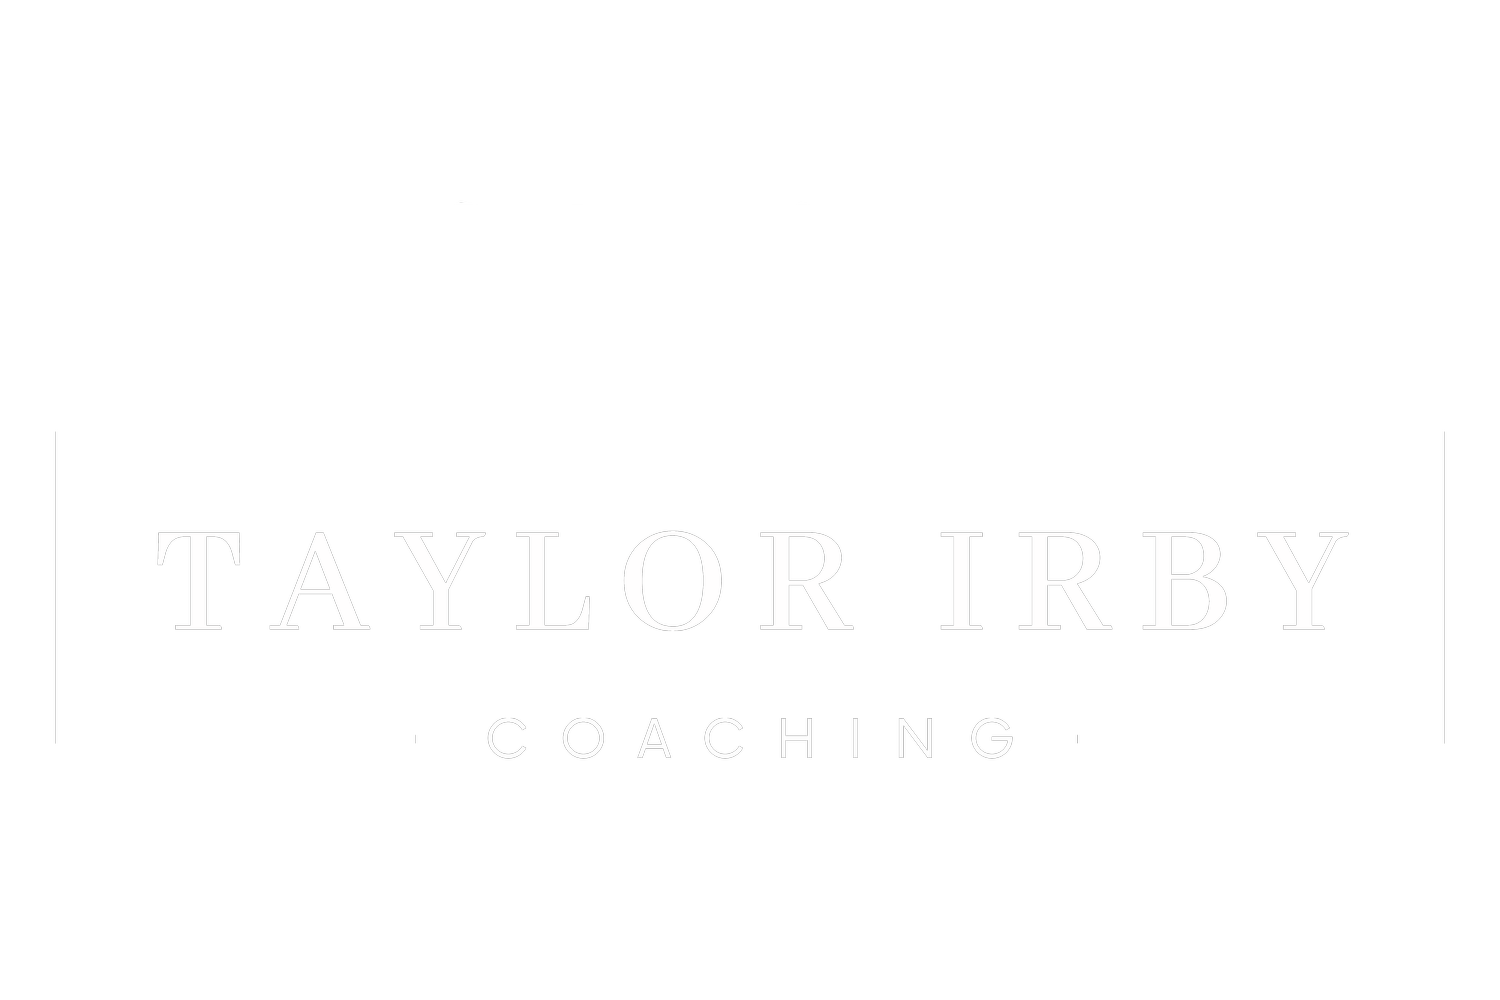 Taylor Irby Coaching